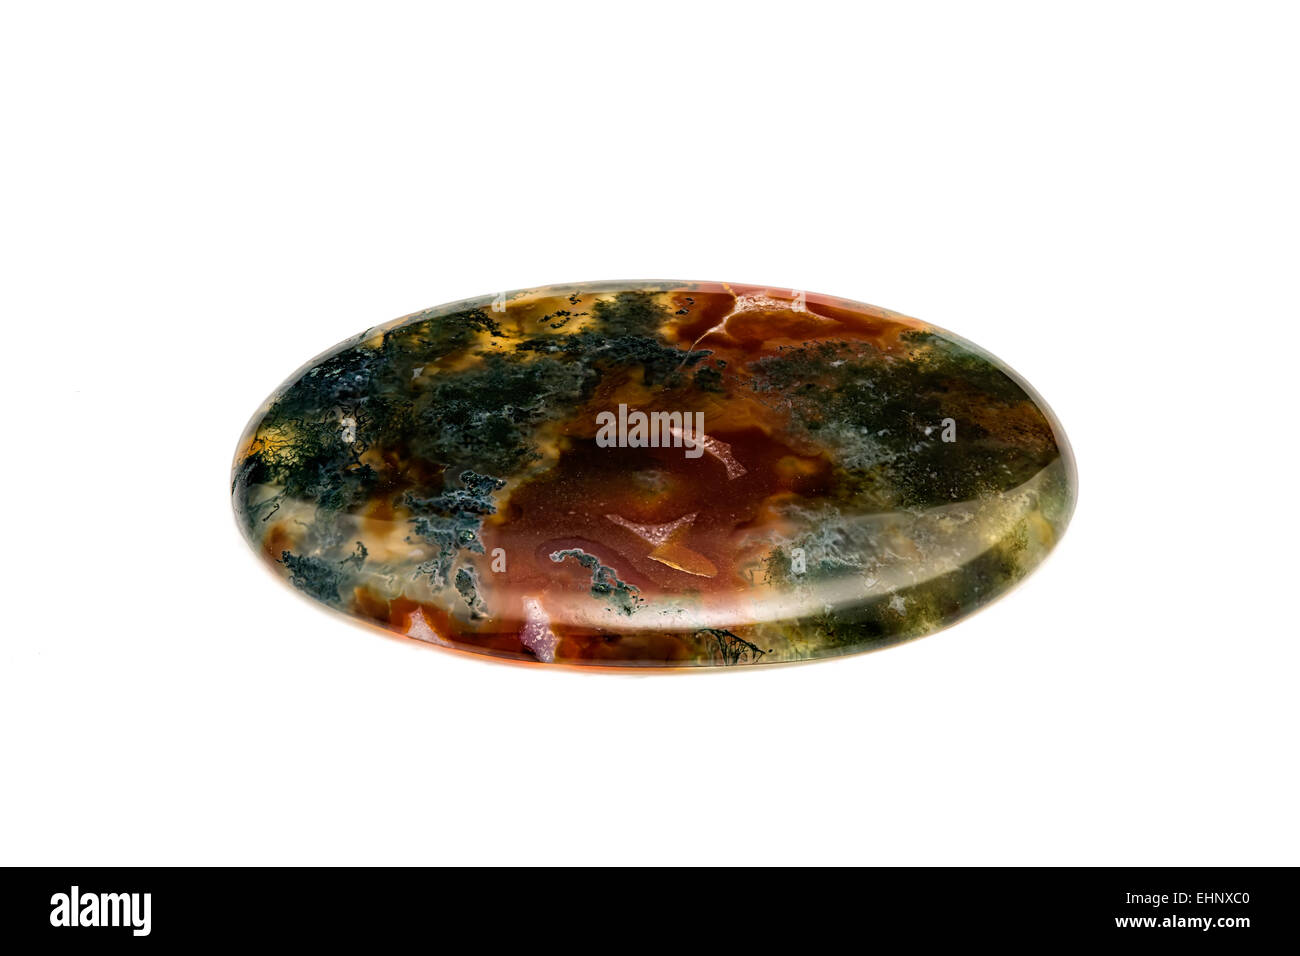 Moss Agate  (Chalcedony, the compact crystalline variety of quartz) Mocha Stone Cabochon with dark moss-like inclusions Crystal Stock Photo